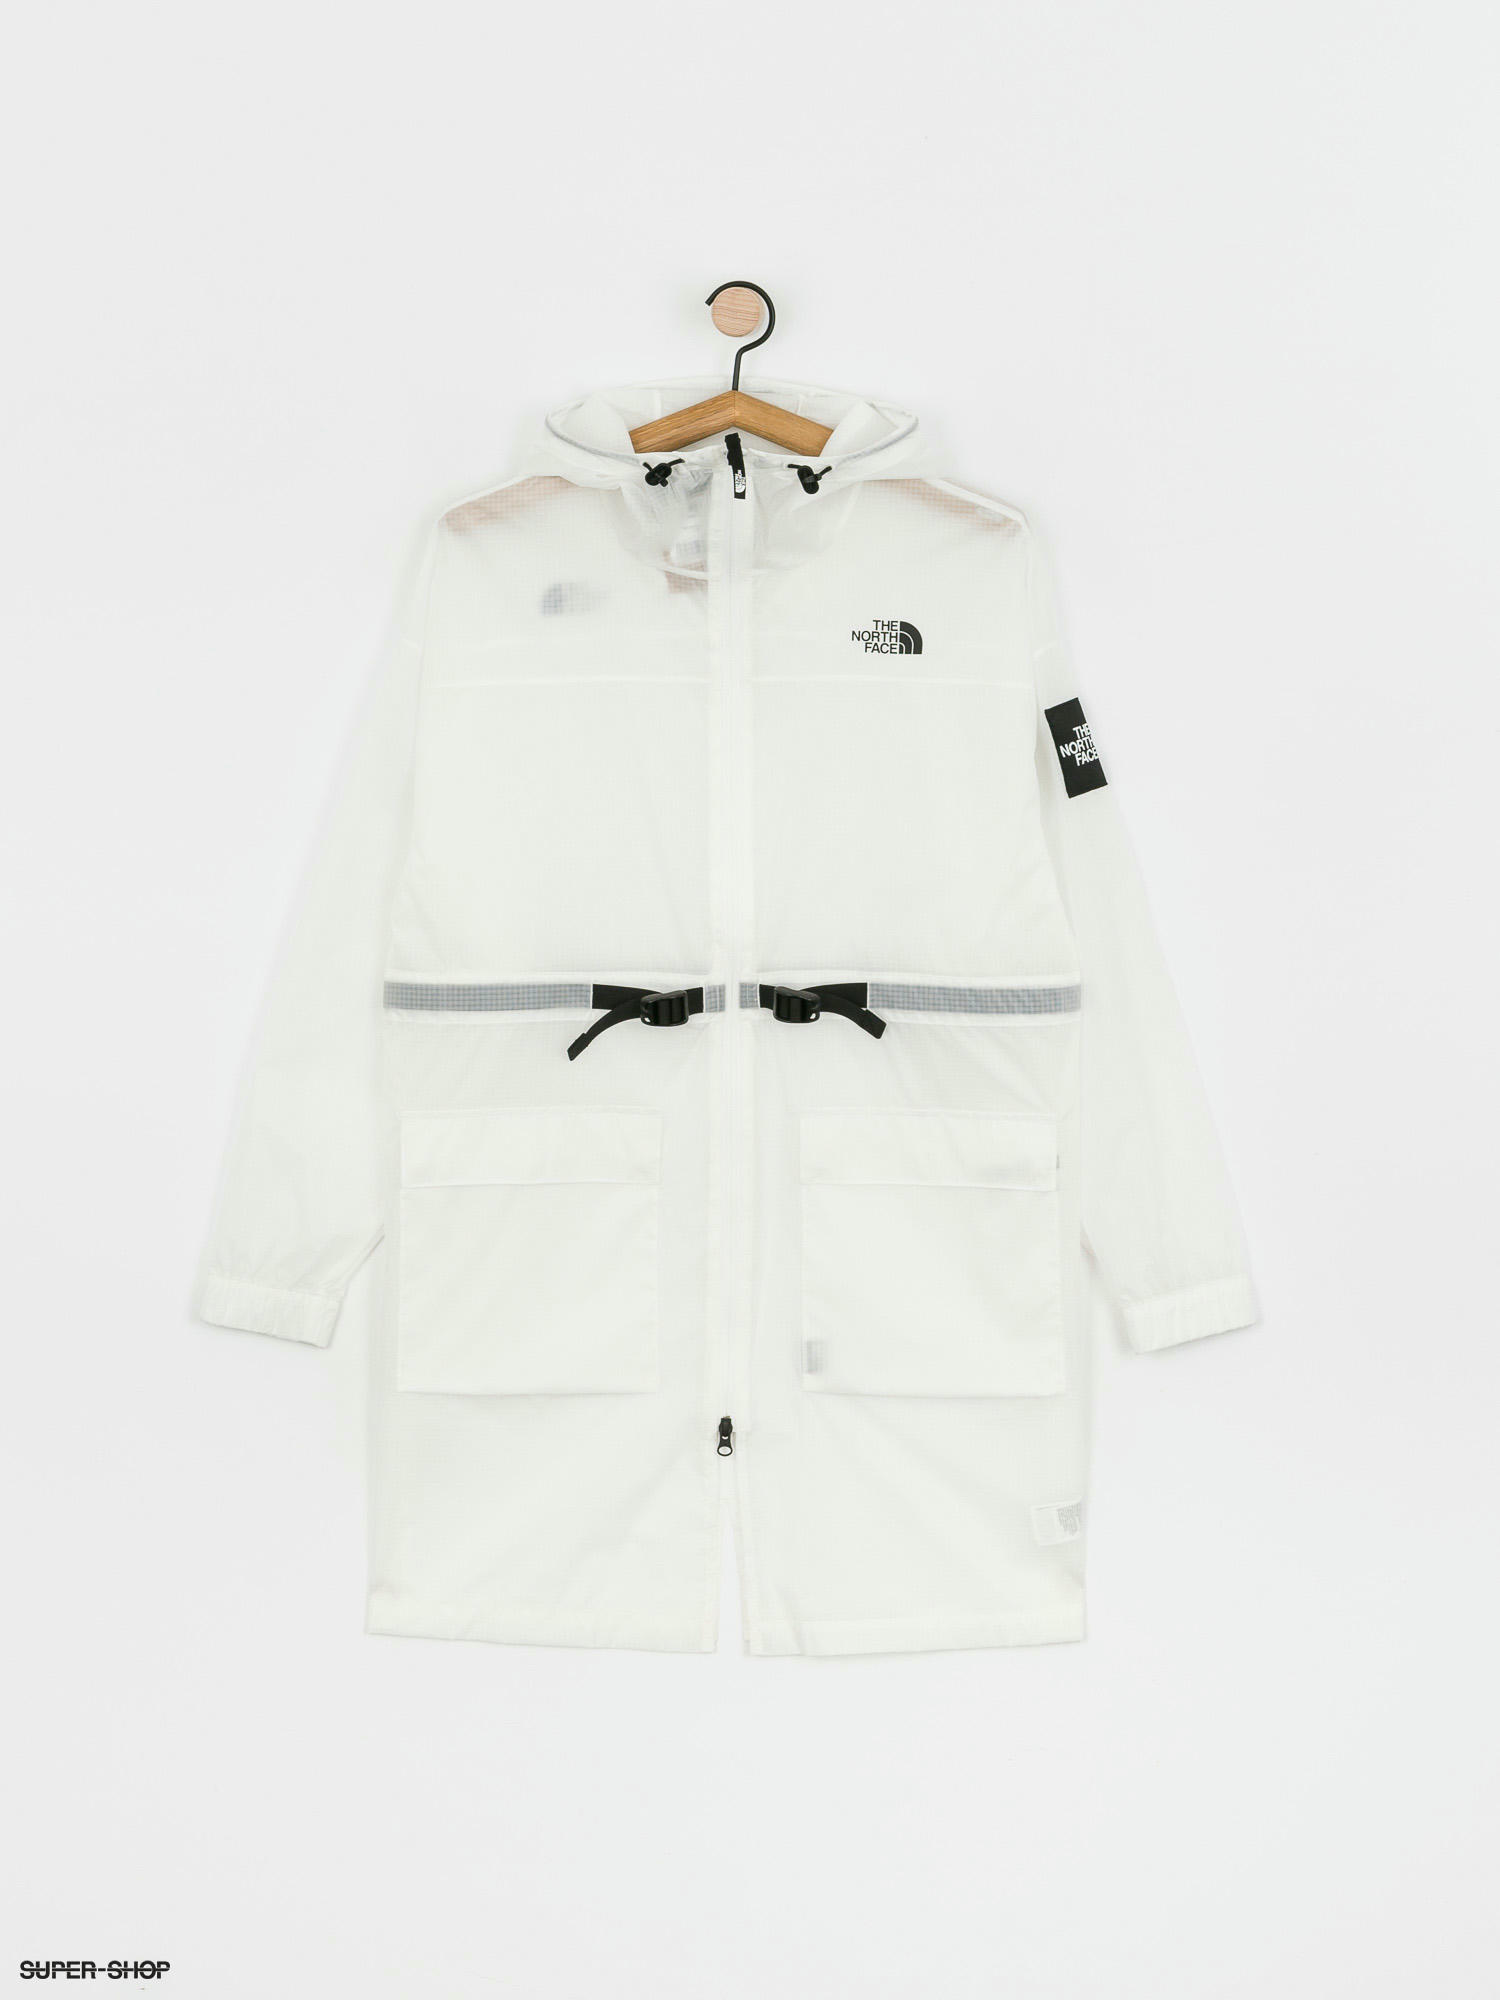 north face white and black coat